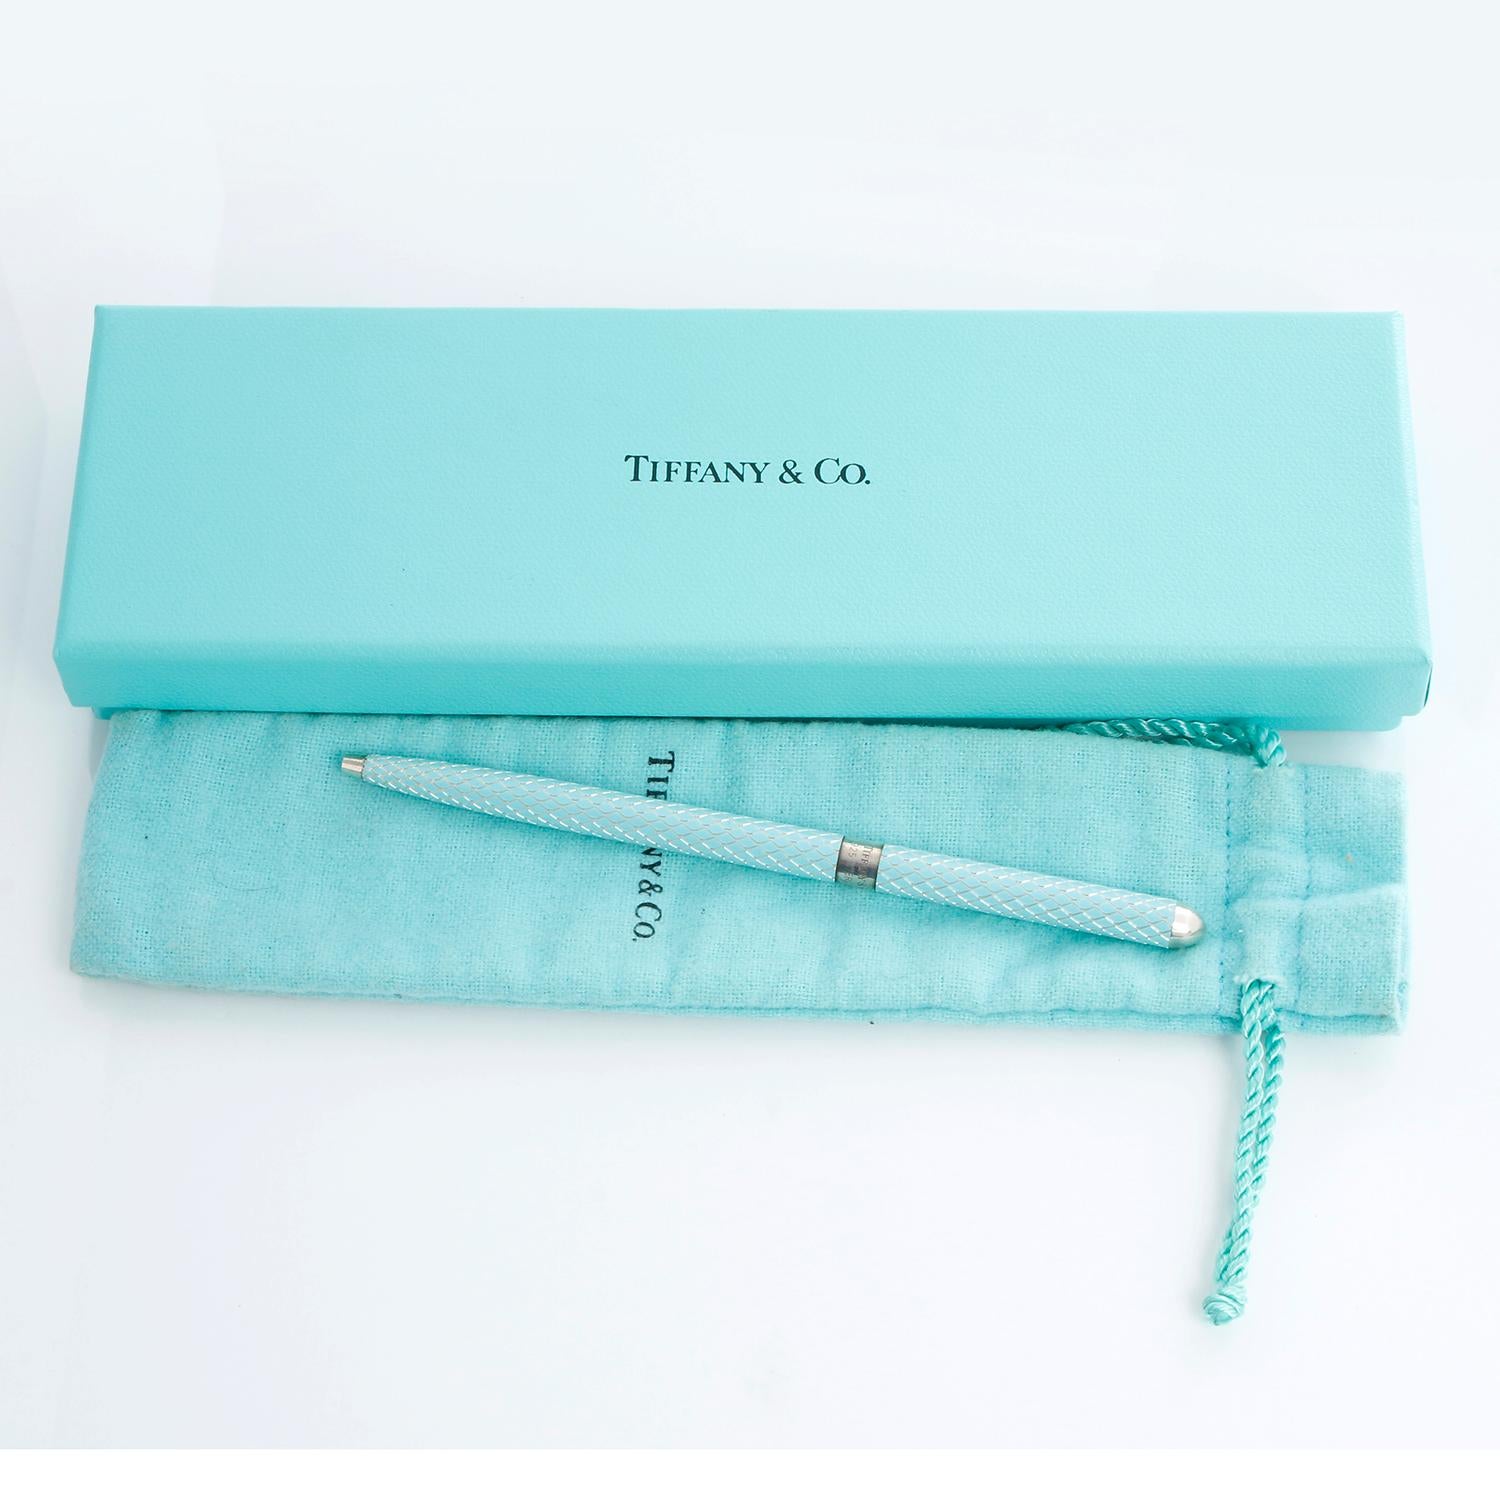 Tiffany & Co. Sterling Silver Ballpoint Purse Pen  - Sterling silver and Tiffany blue enamel Tiffany & Co. ballpoint purse pen with twist retractable closure, diamond pattern at enamel finish and brand stamp and hallmark at center band. Includes box